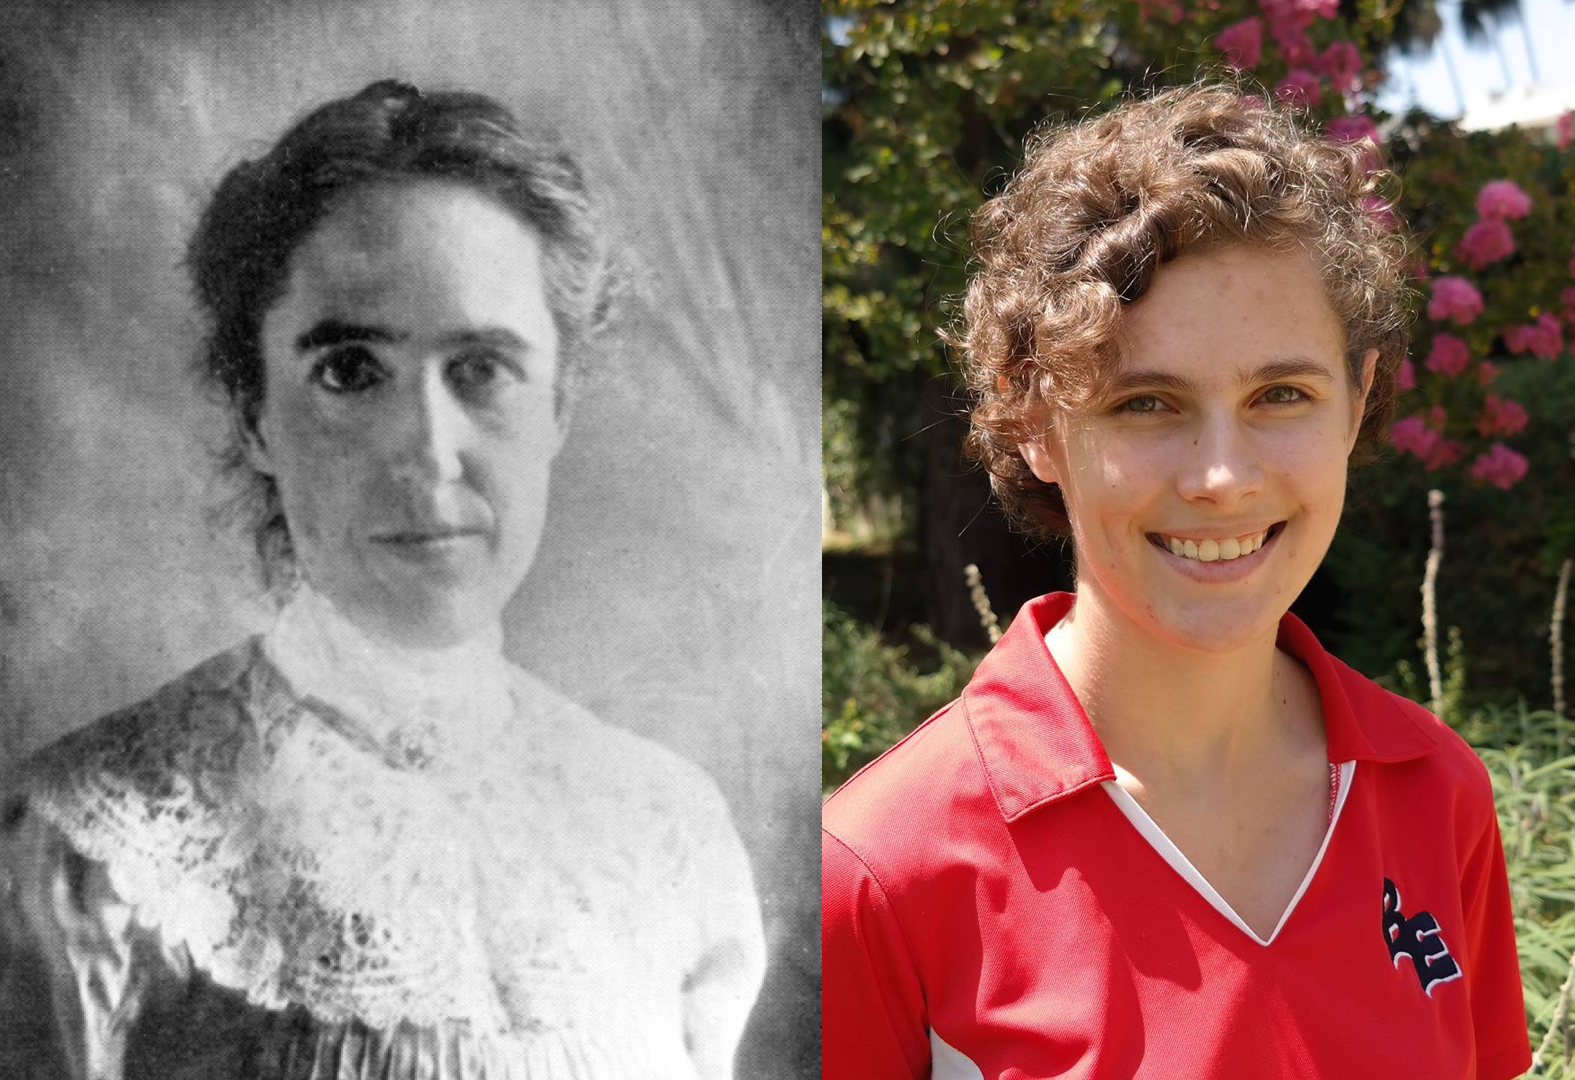 Two photographs side-by-side: Henrietta Leavitt in the early 1900s and Kate Hartman in 2017